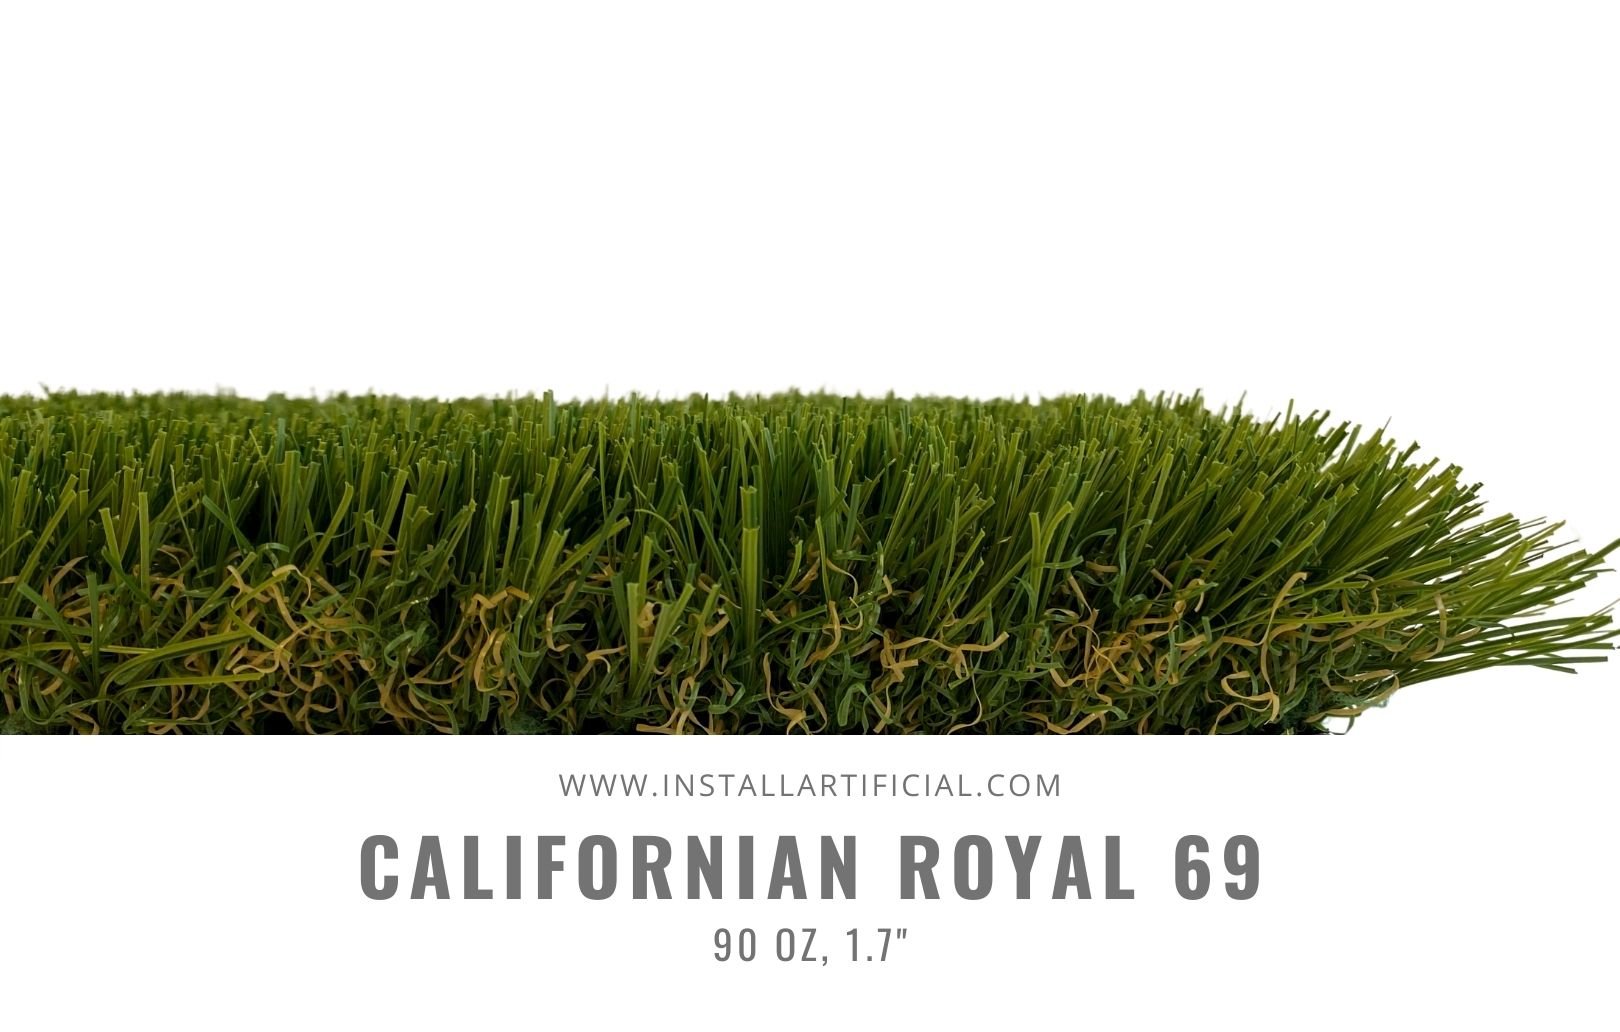 Californian Royal 69, Imperial Synthetic Turf, side angle